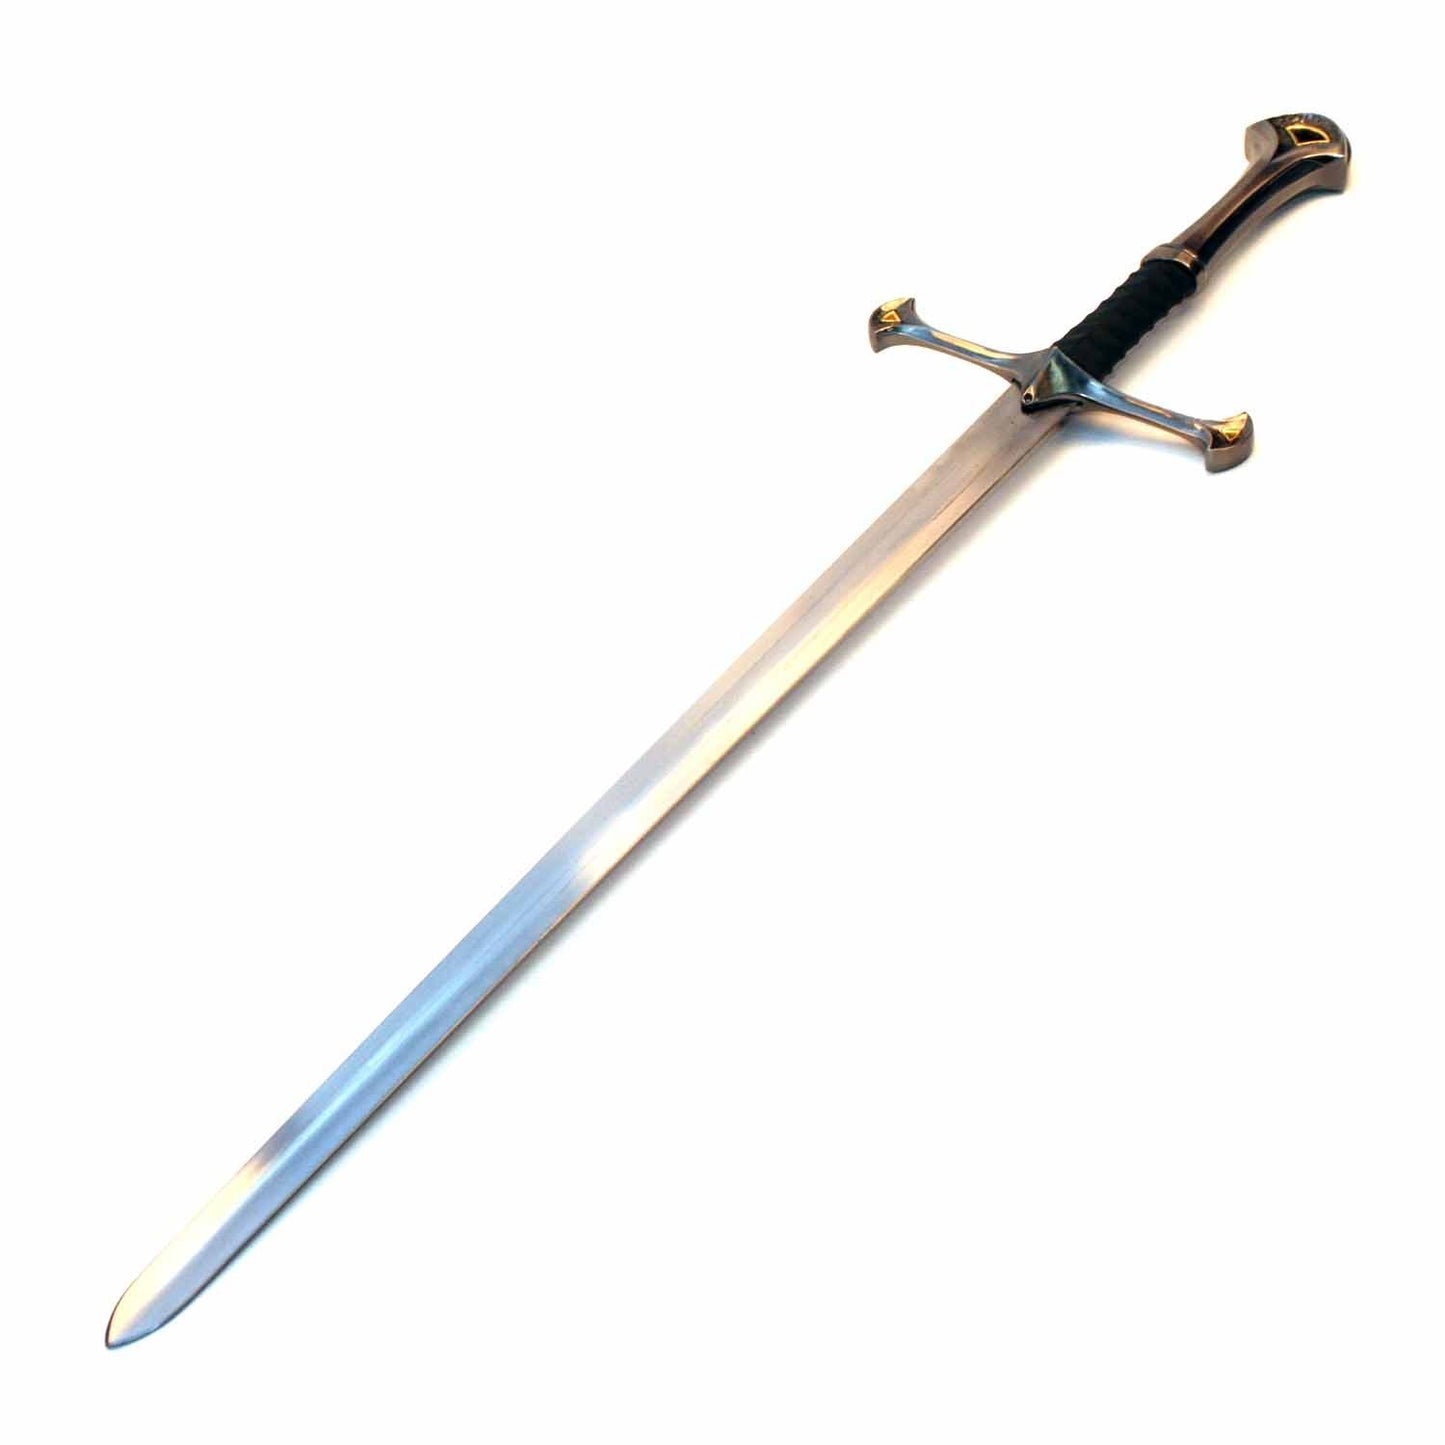 Medieval Knight Arming Sword with Scabbard (Oakeshotte Type XVIIIb)